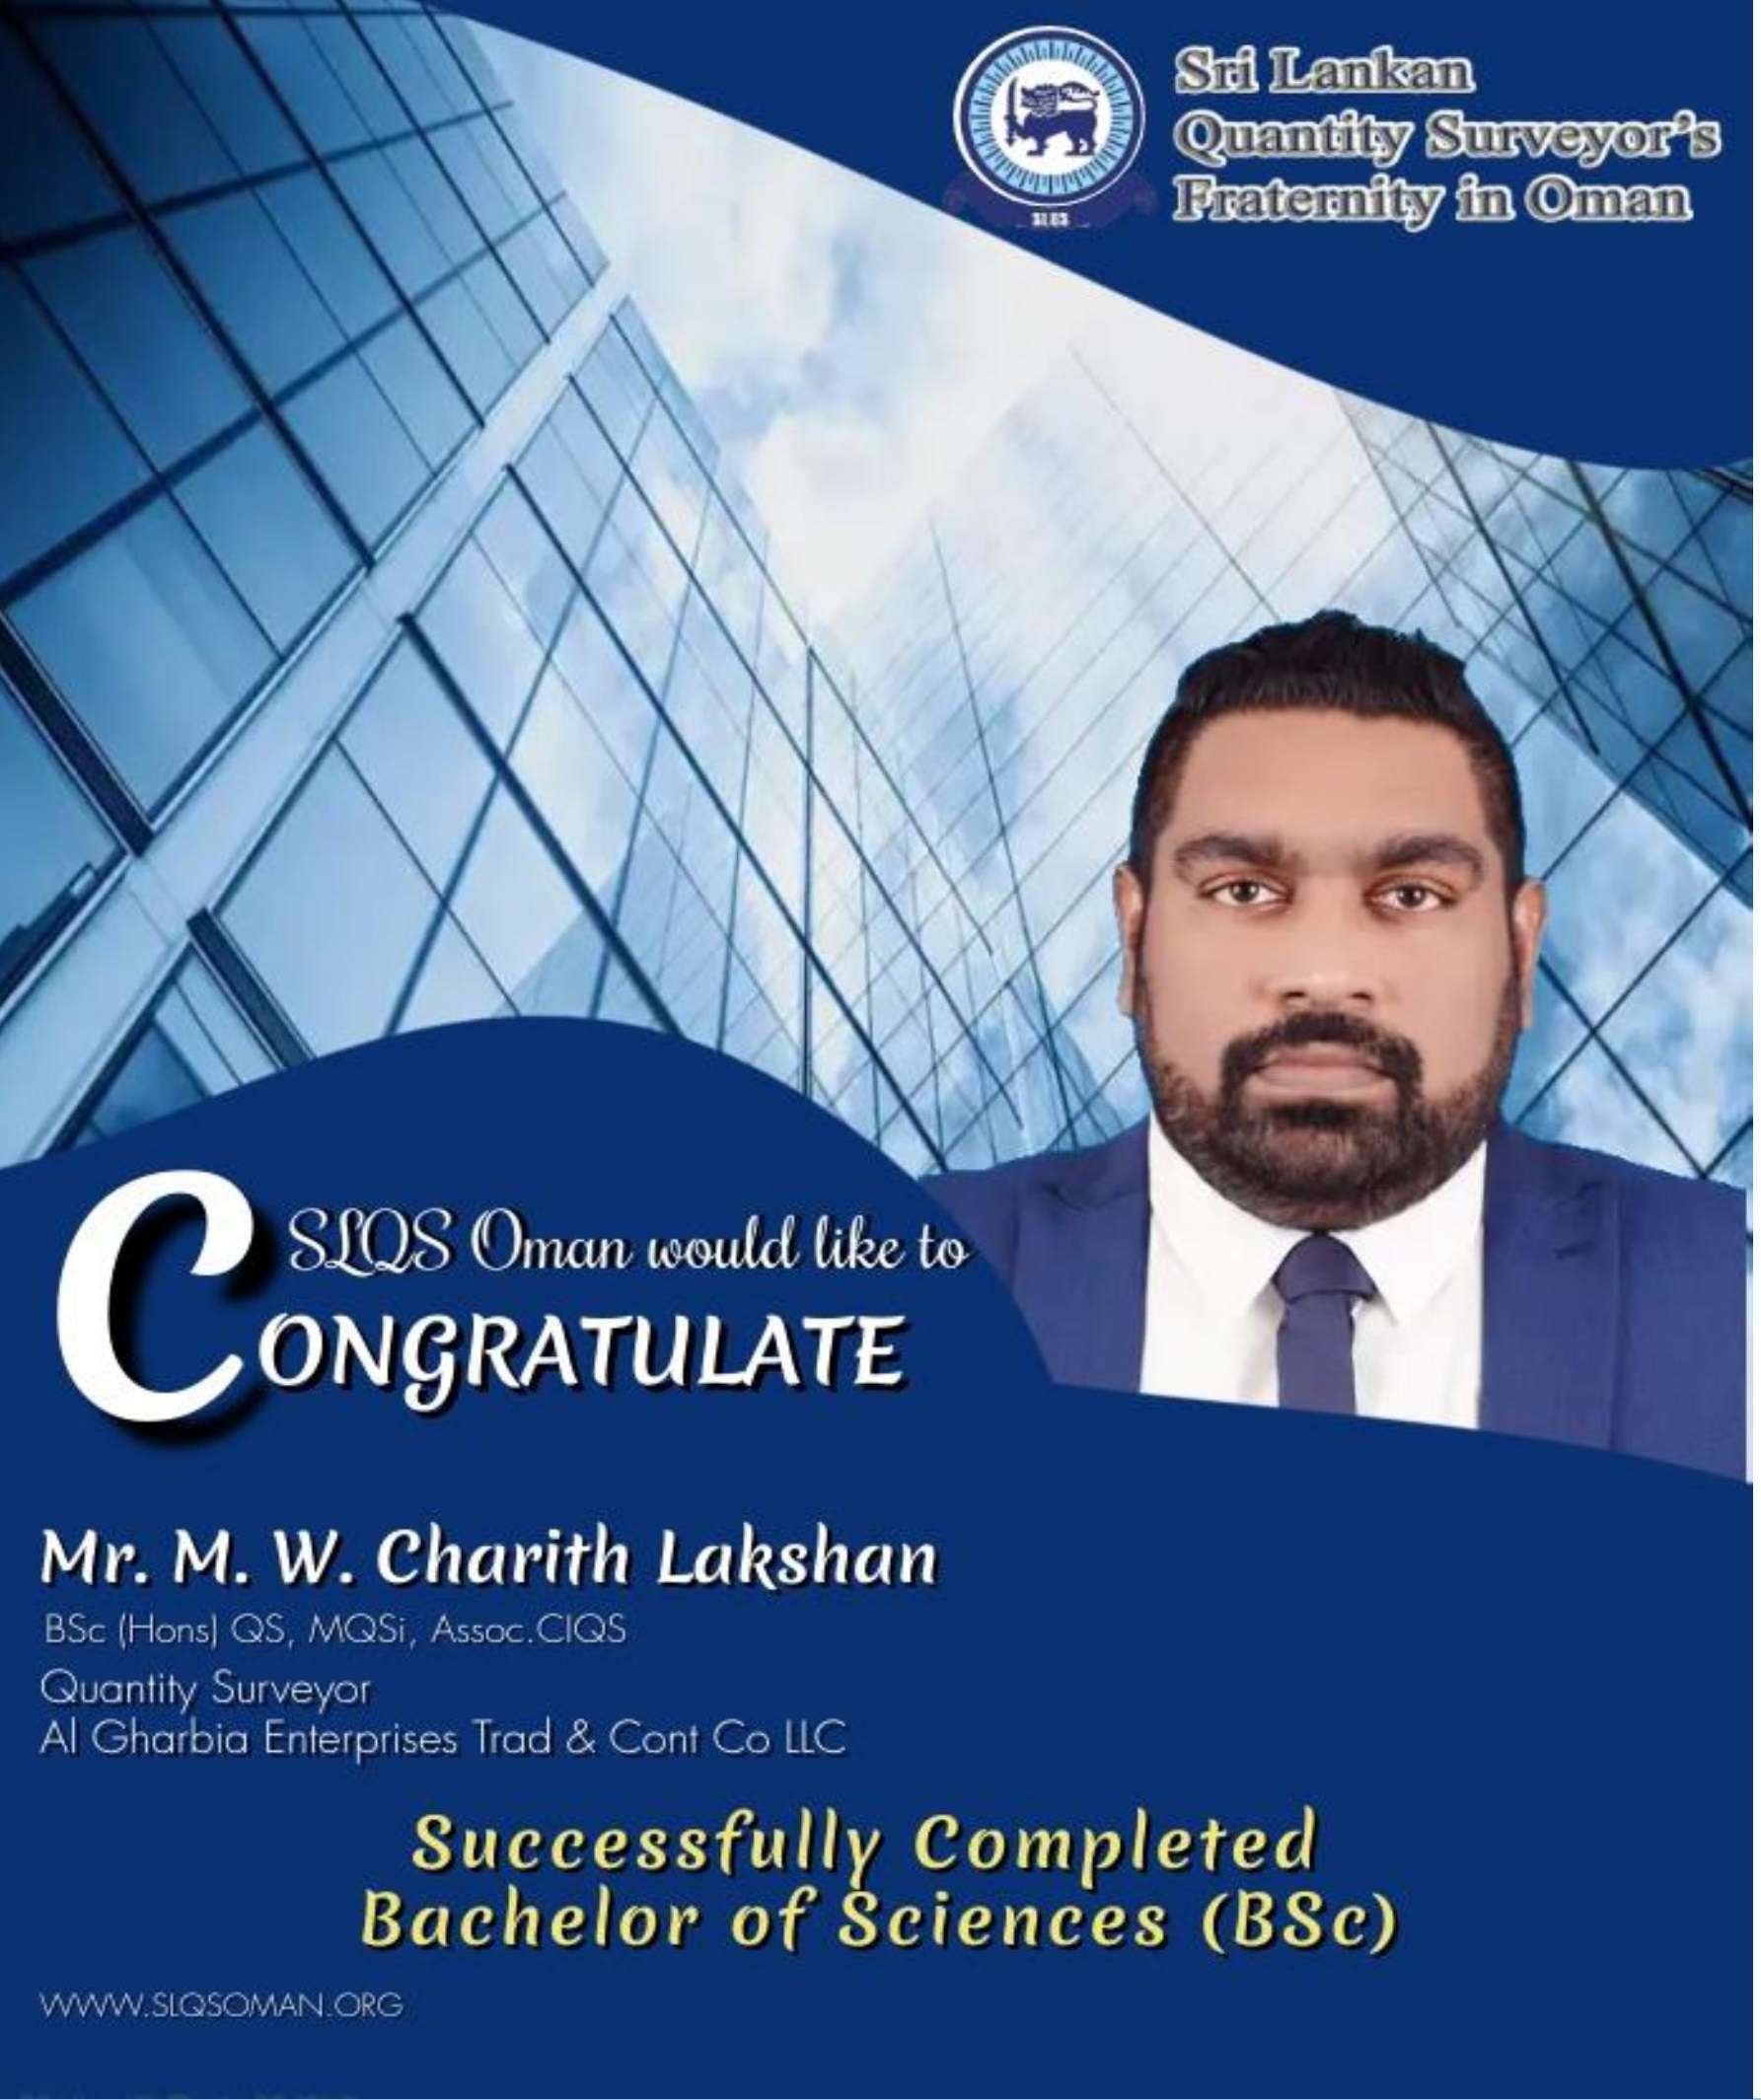 Congratulations!! Mr. Charith Lakshan!! For successfully completion of BSc.